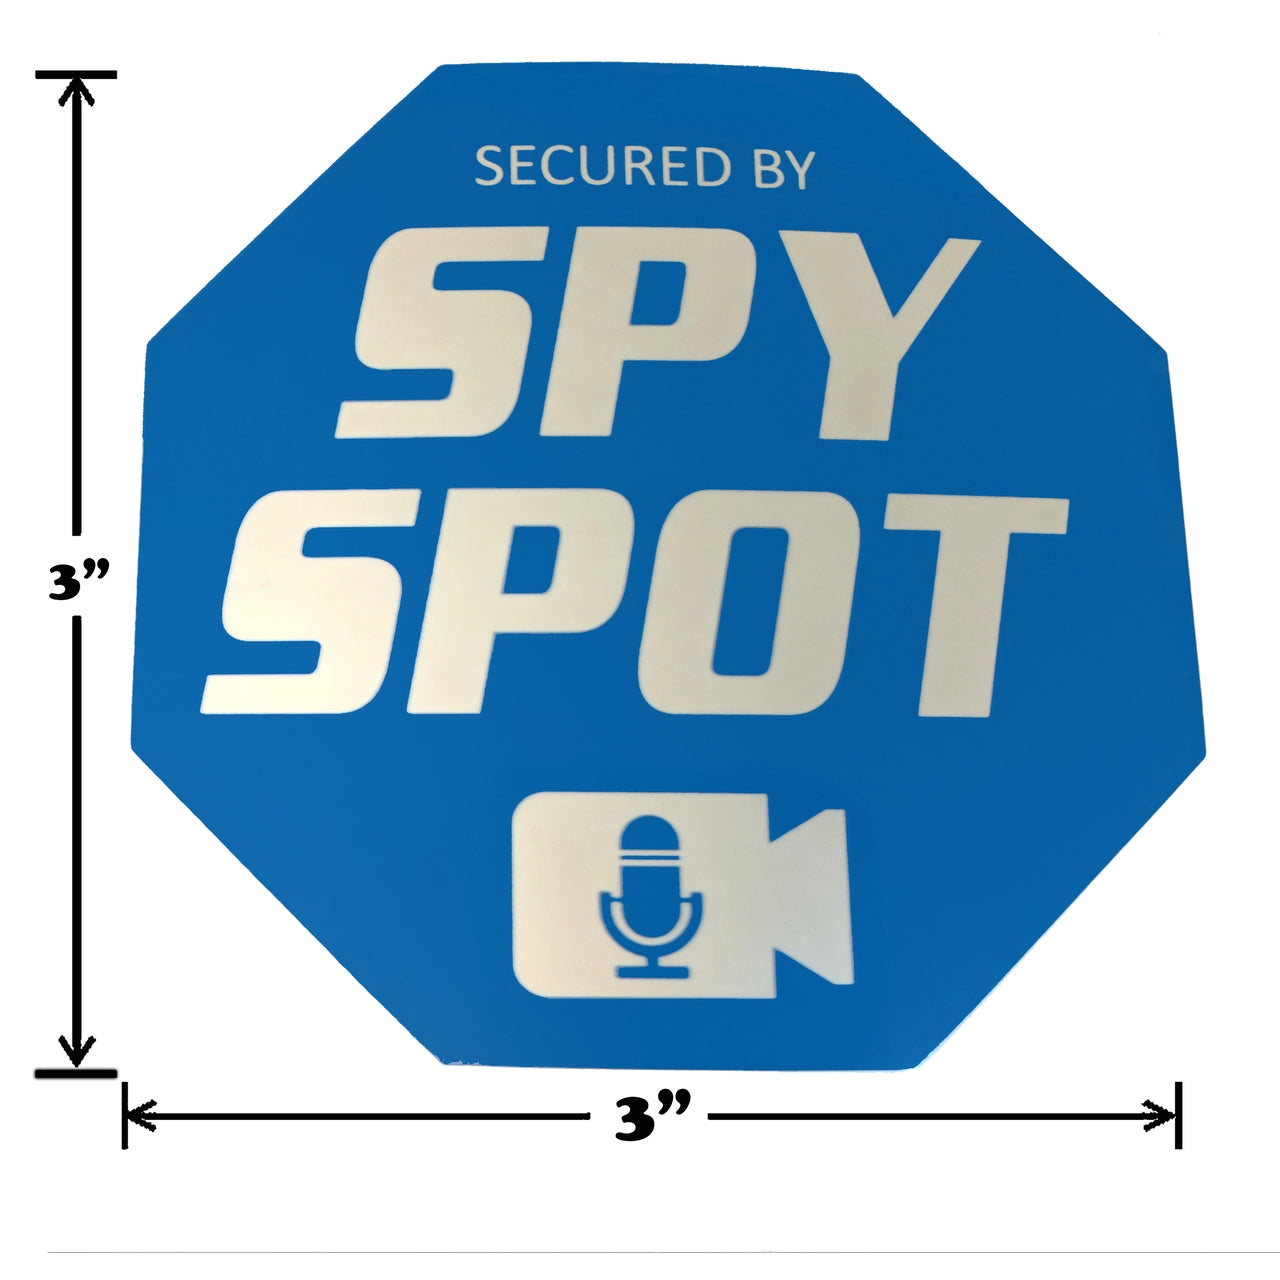 Spy Spot ADT Style Vinyl Window Stickers 6 Pack Double Sided 3" x 3" Alarm Security